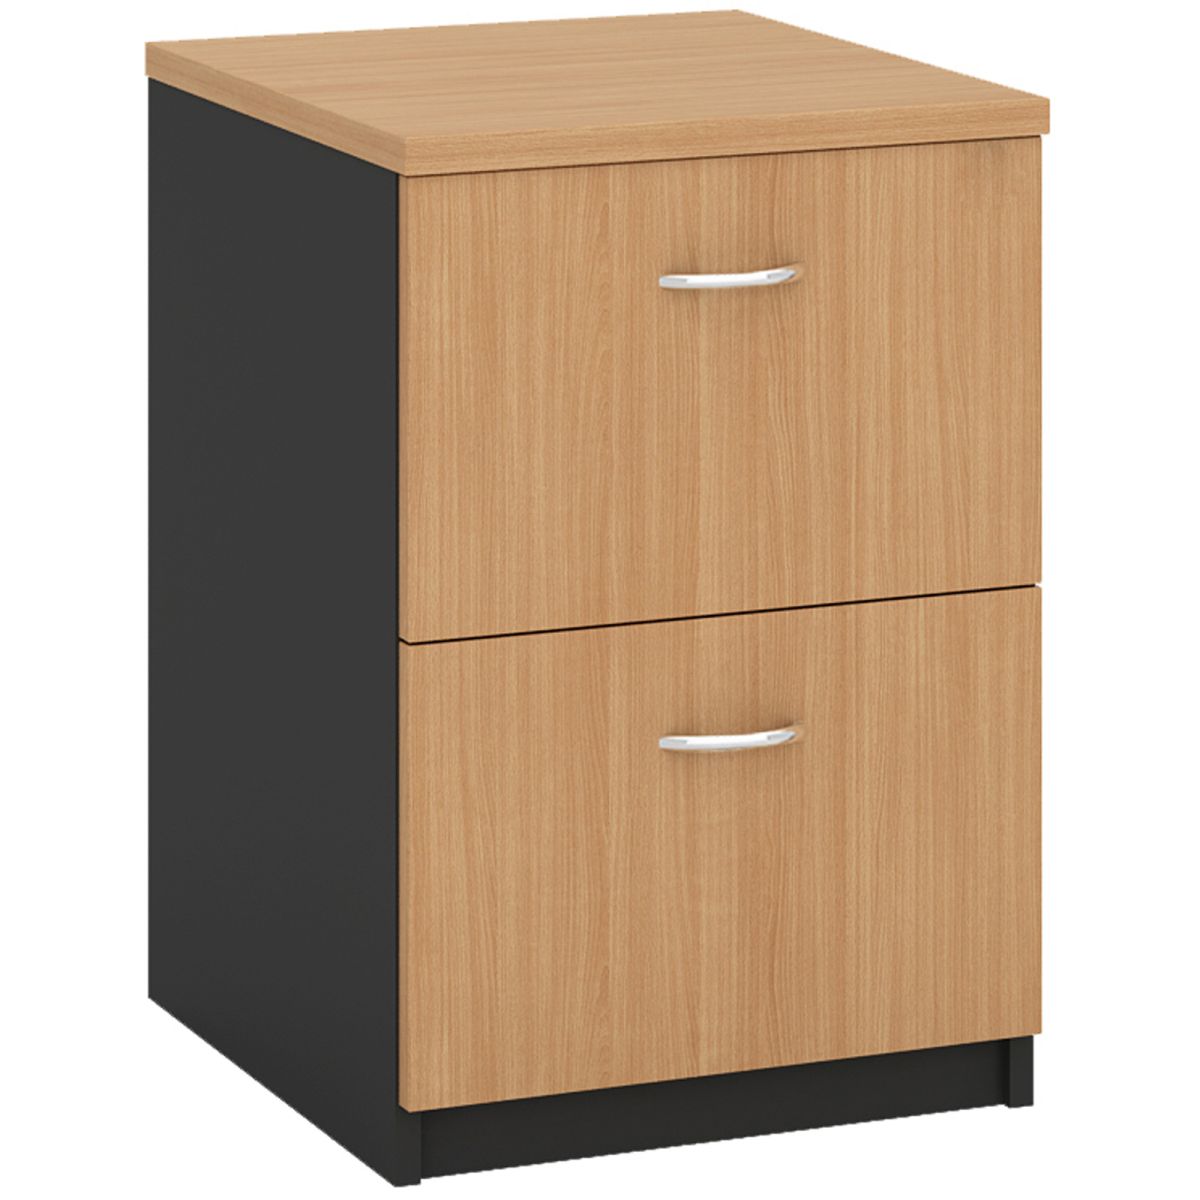 Beech colour file cabinet with two drawers